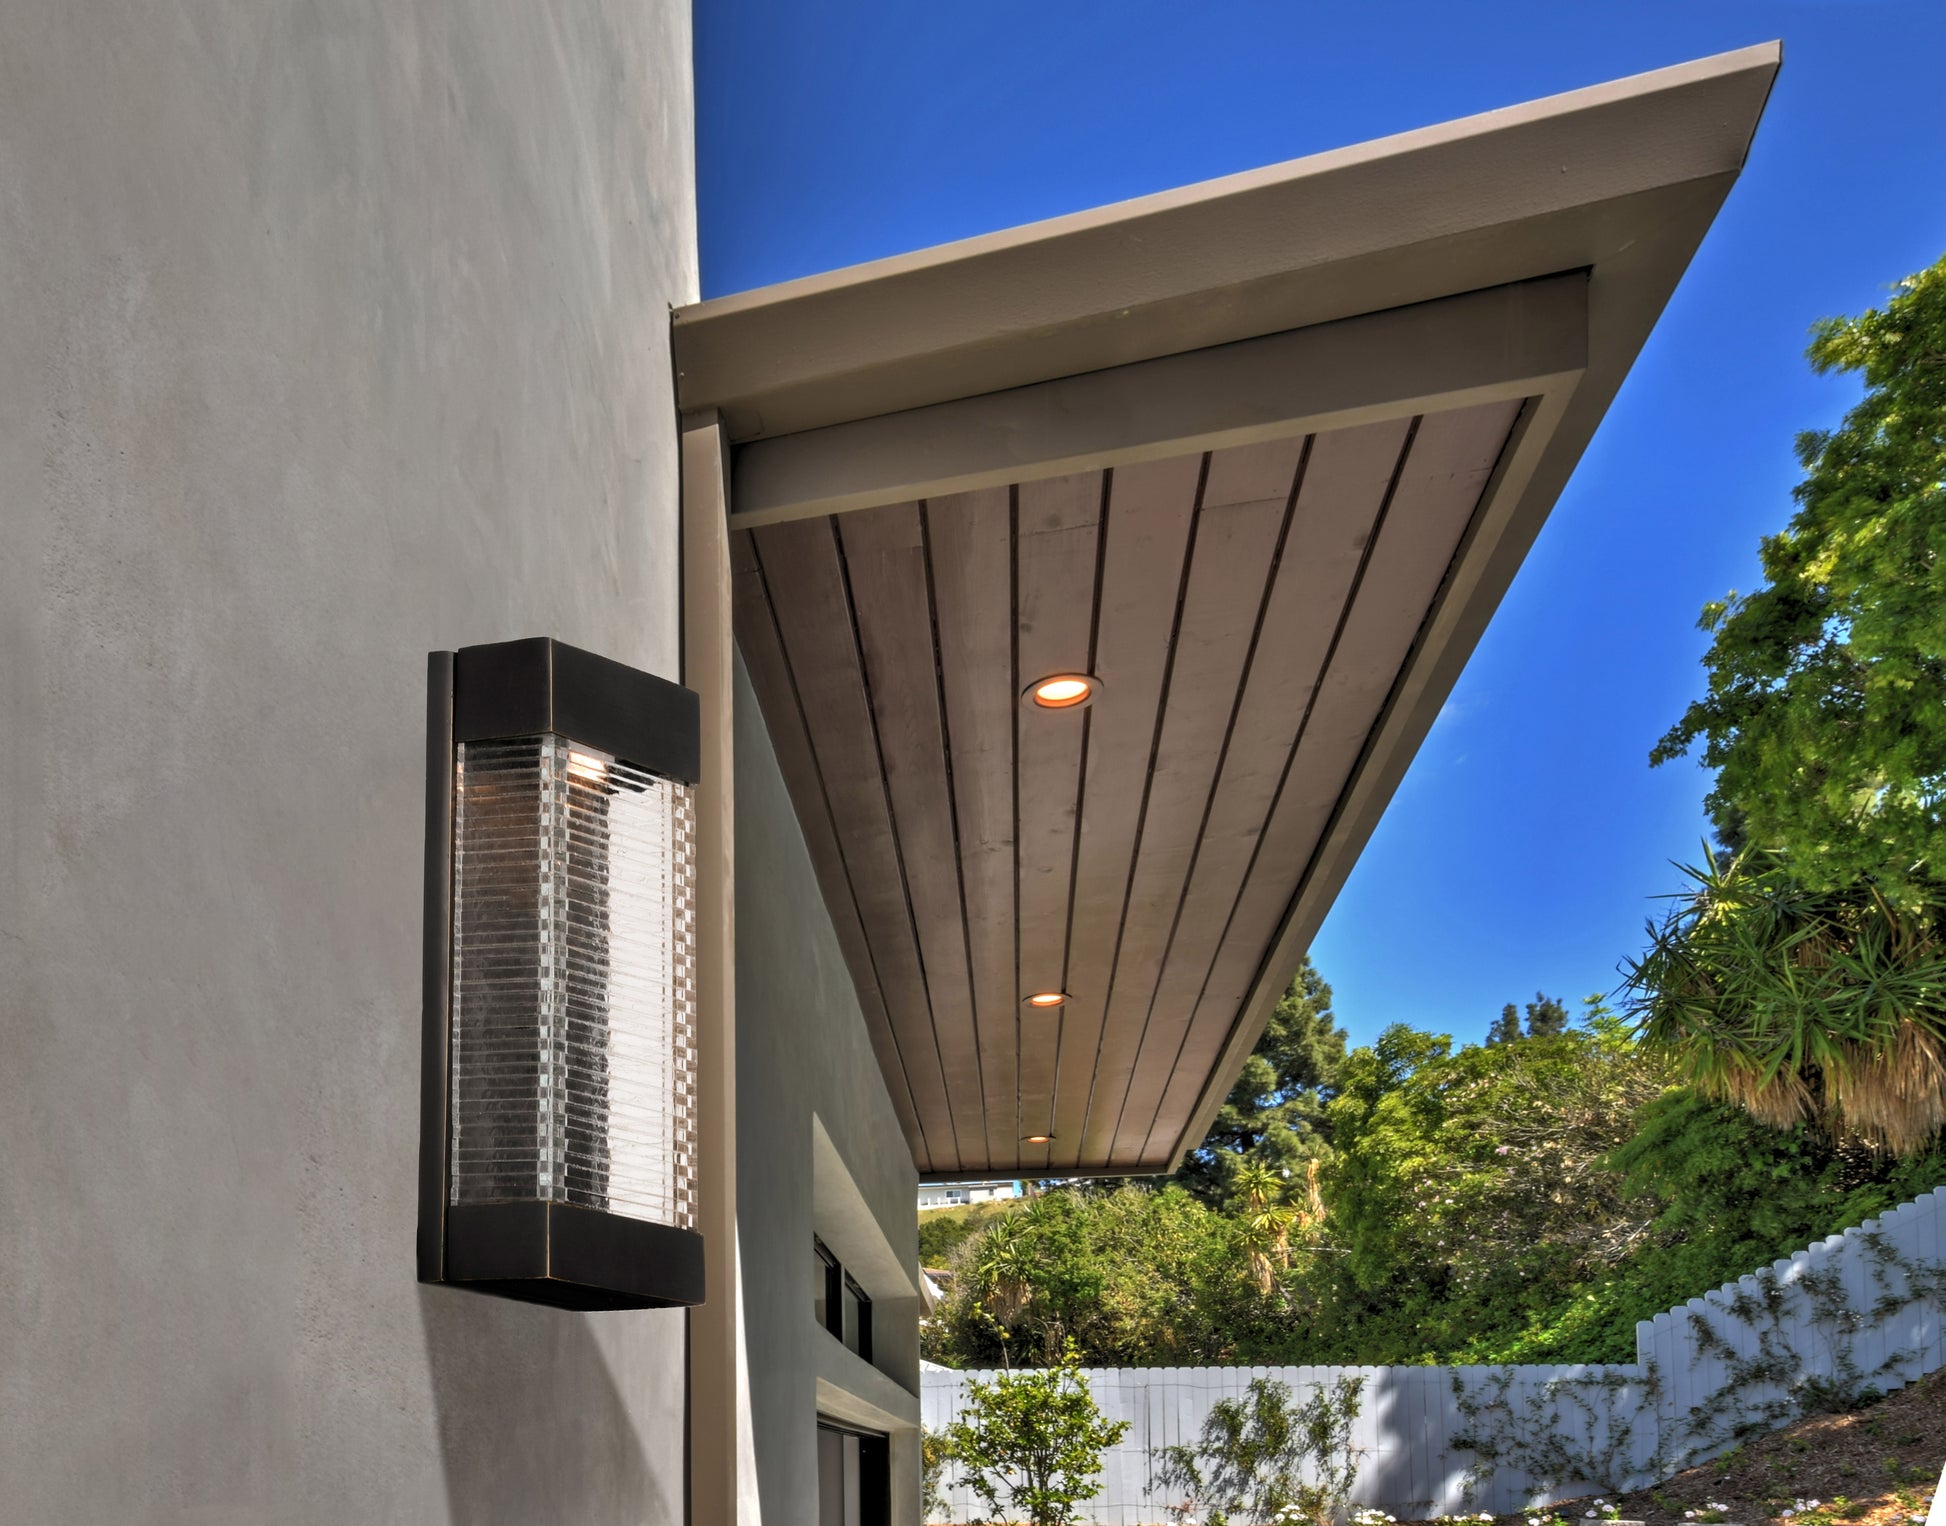 Maxim Stackhouse VX LED Outdoor Wall Sconce